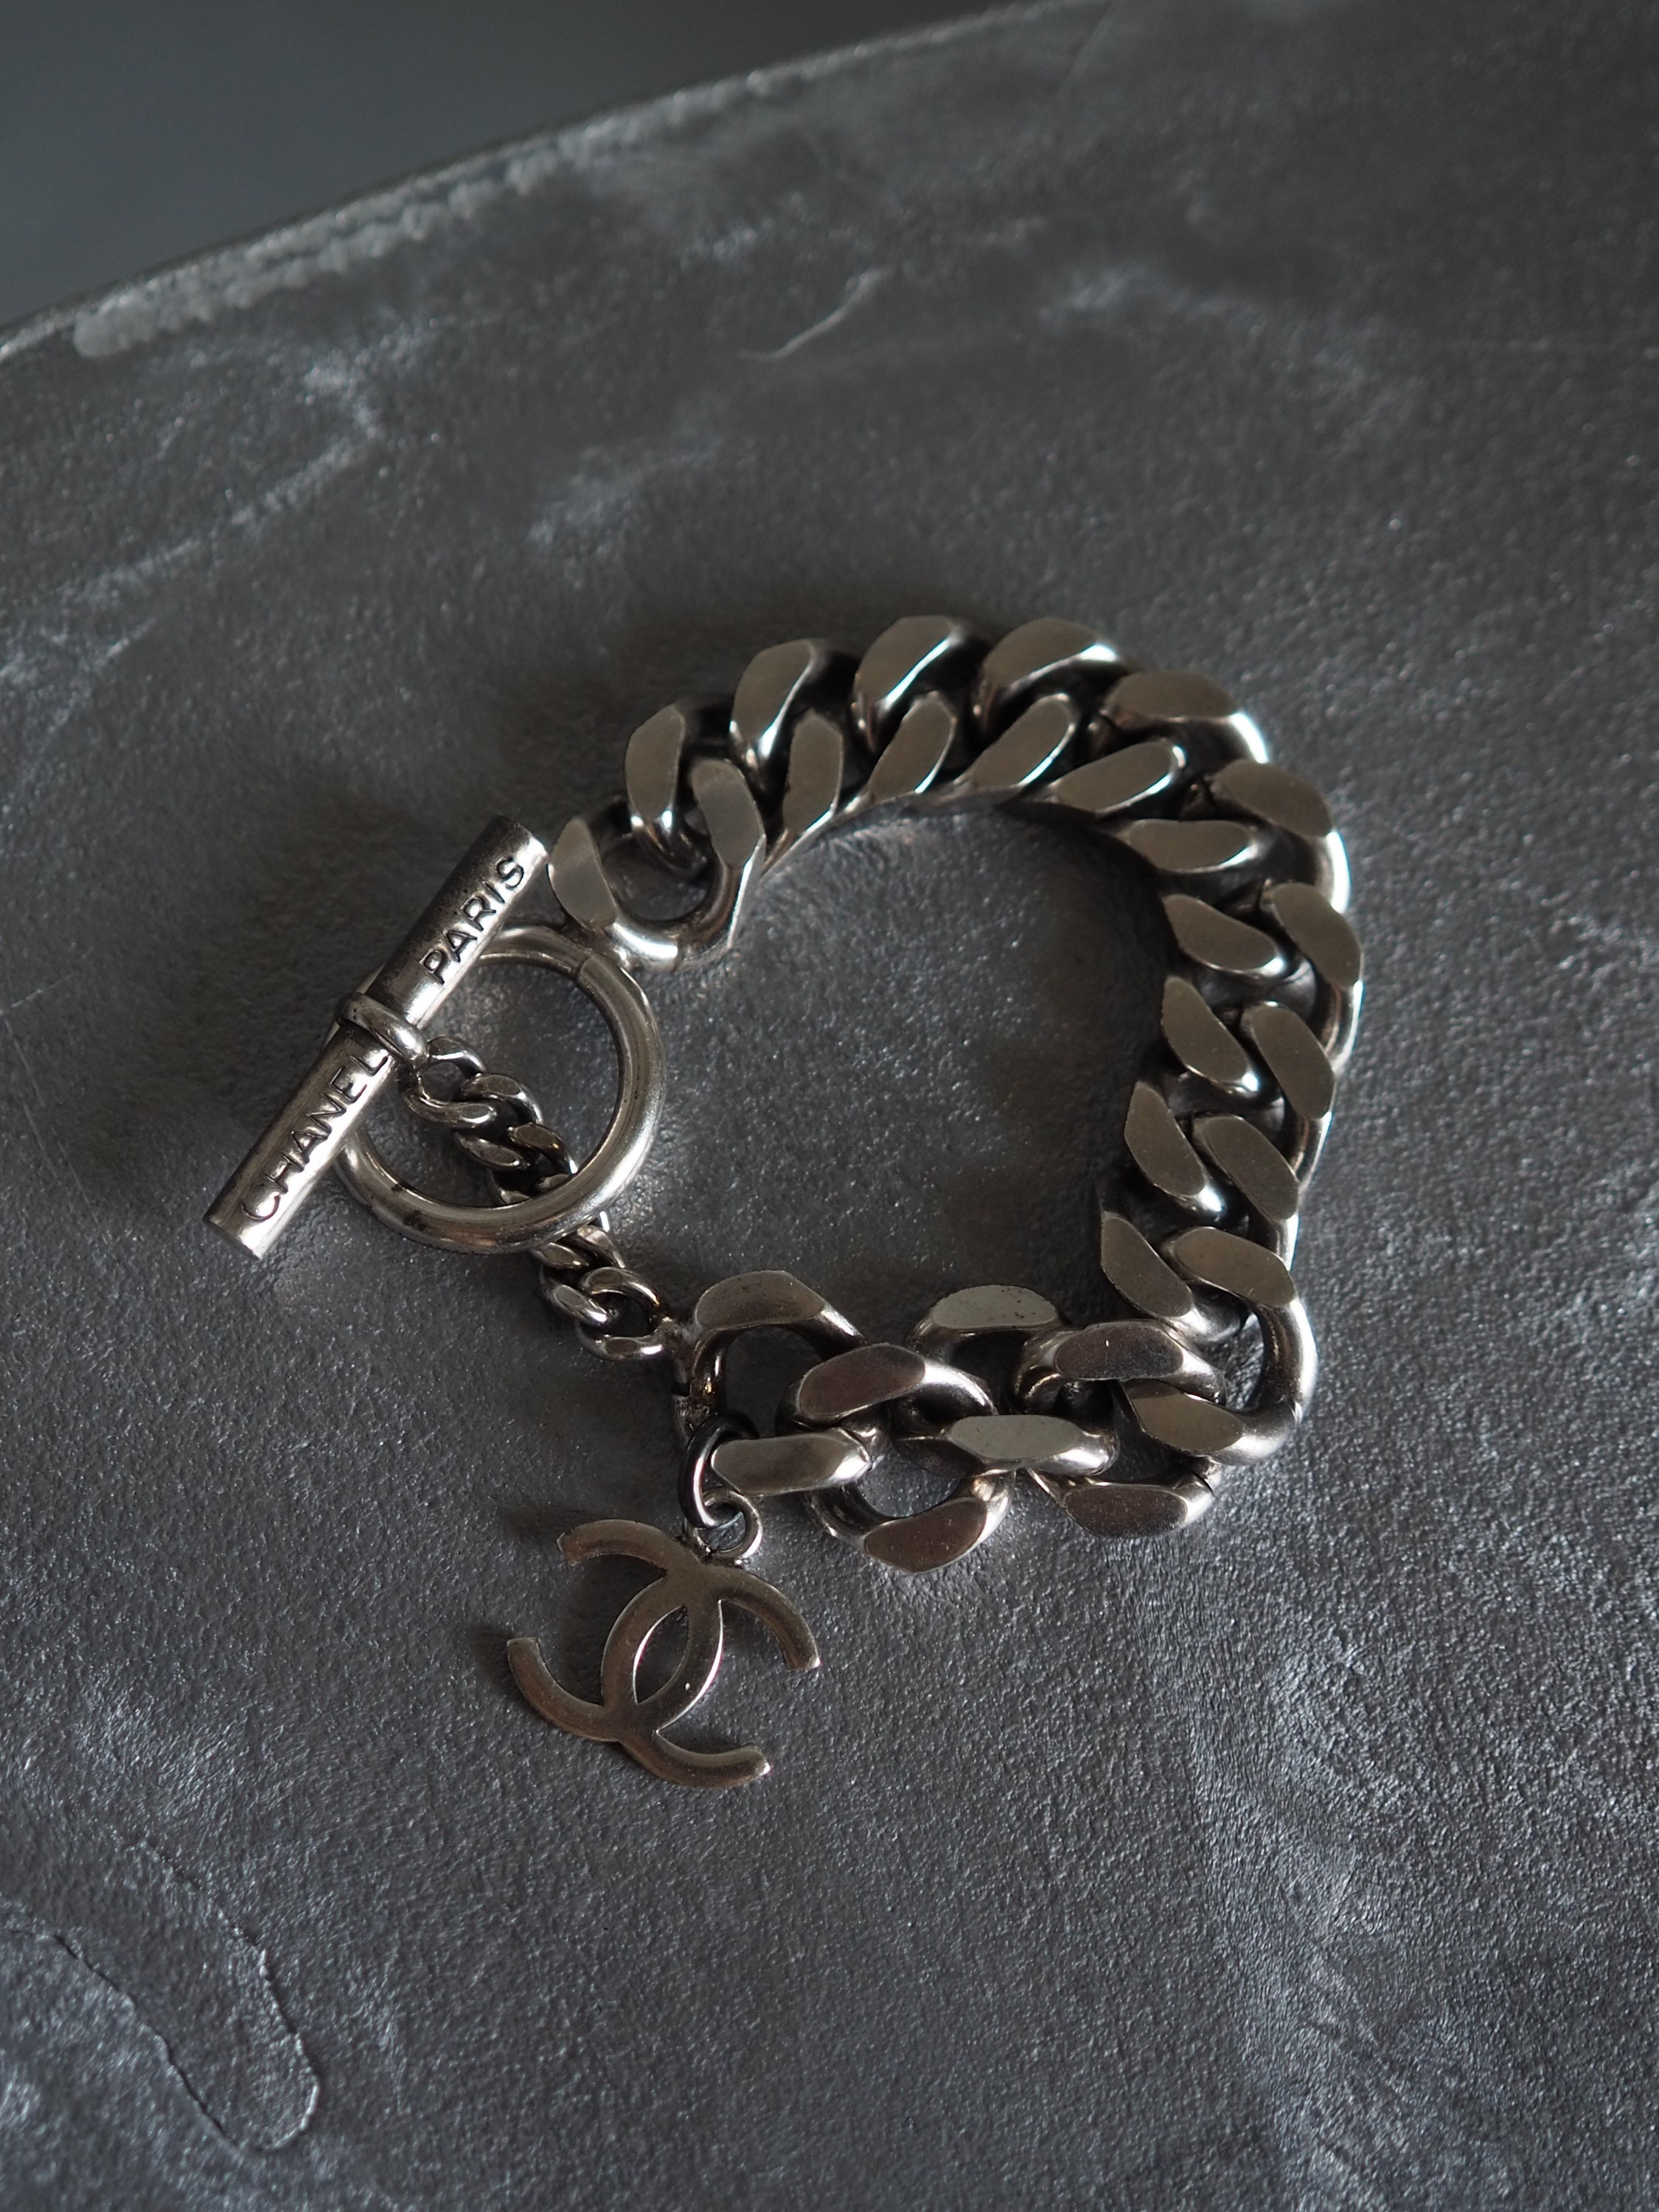 CHANEL, Jewelry, Coco Chanel Currency Vintage Chain Coin Bracelet